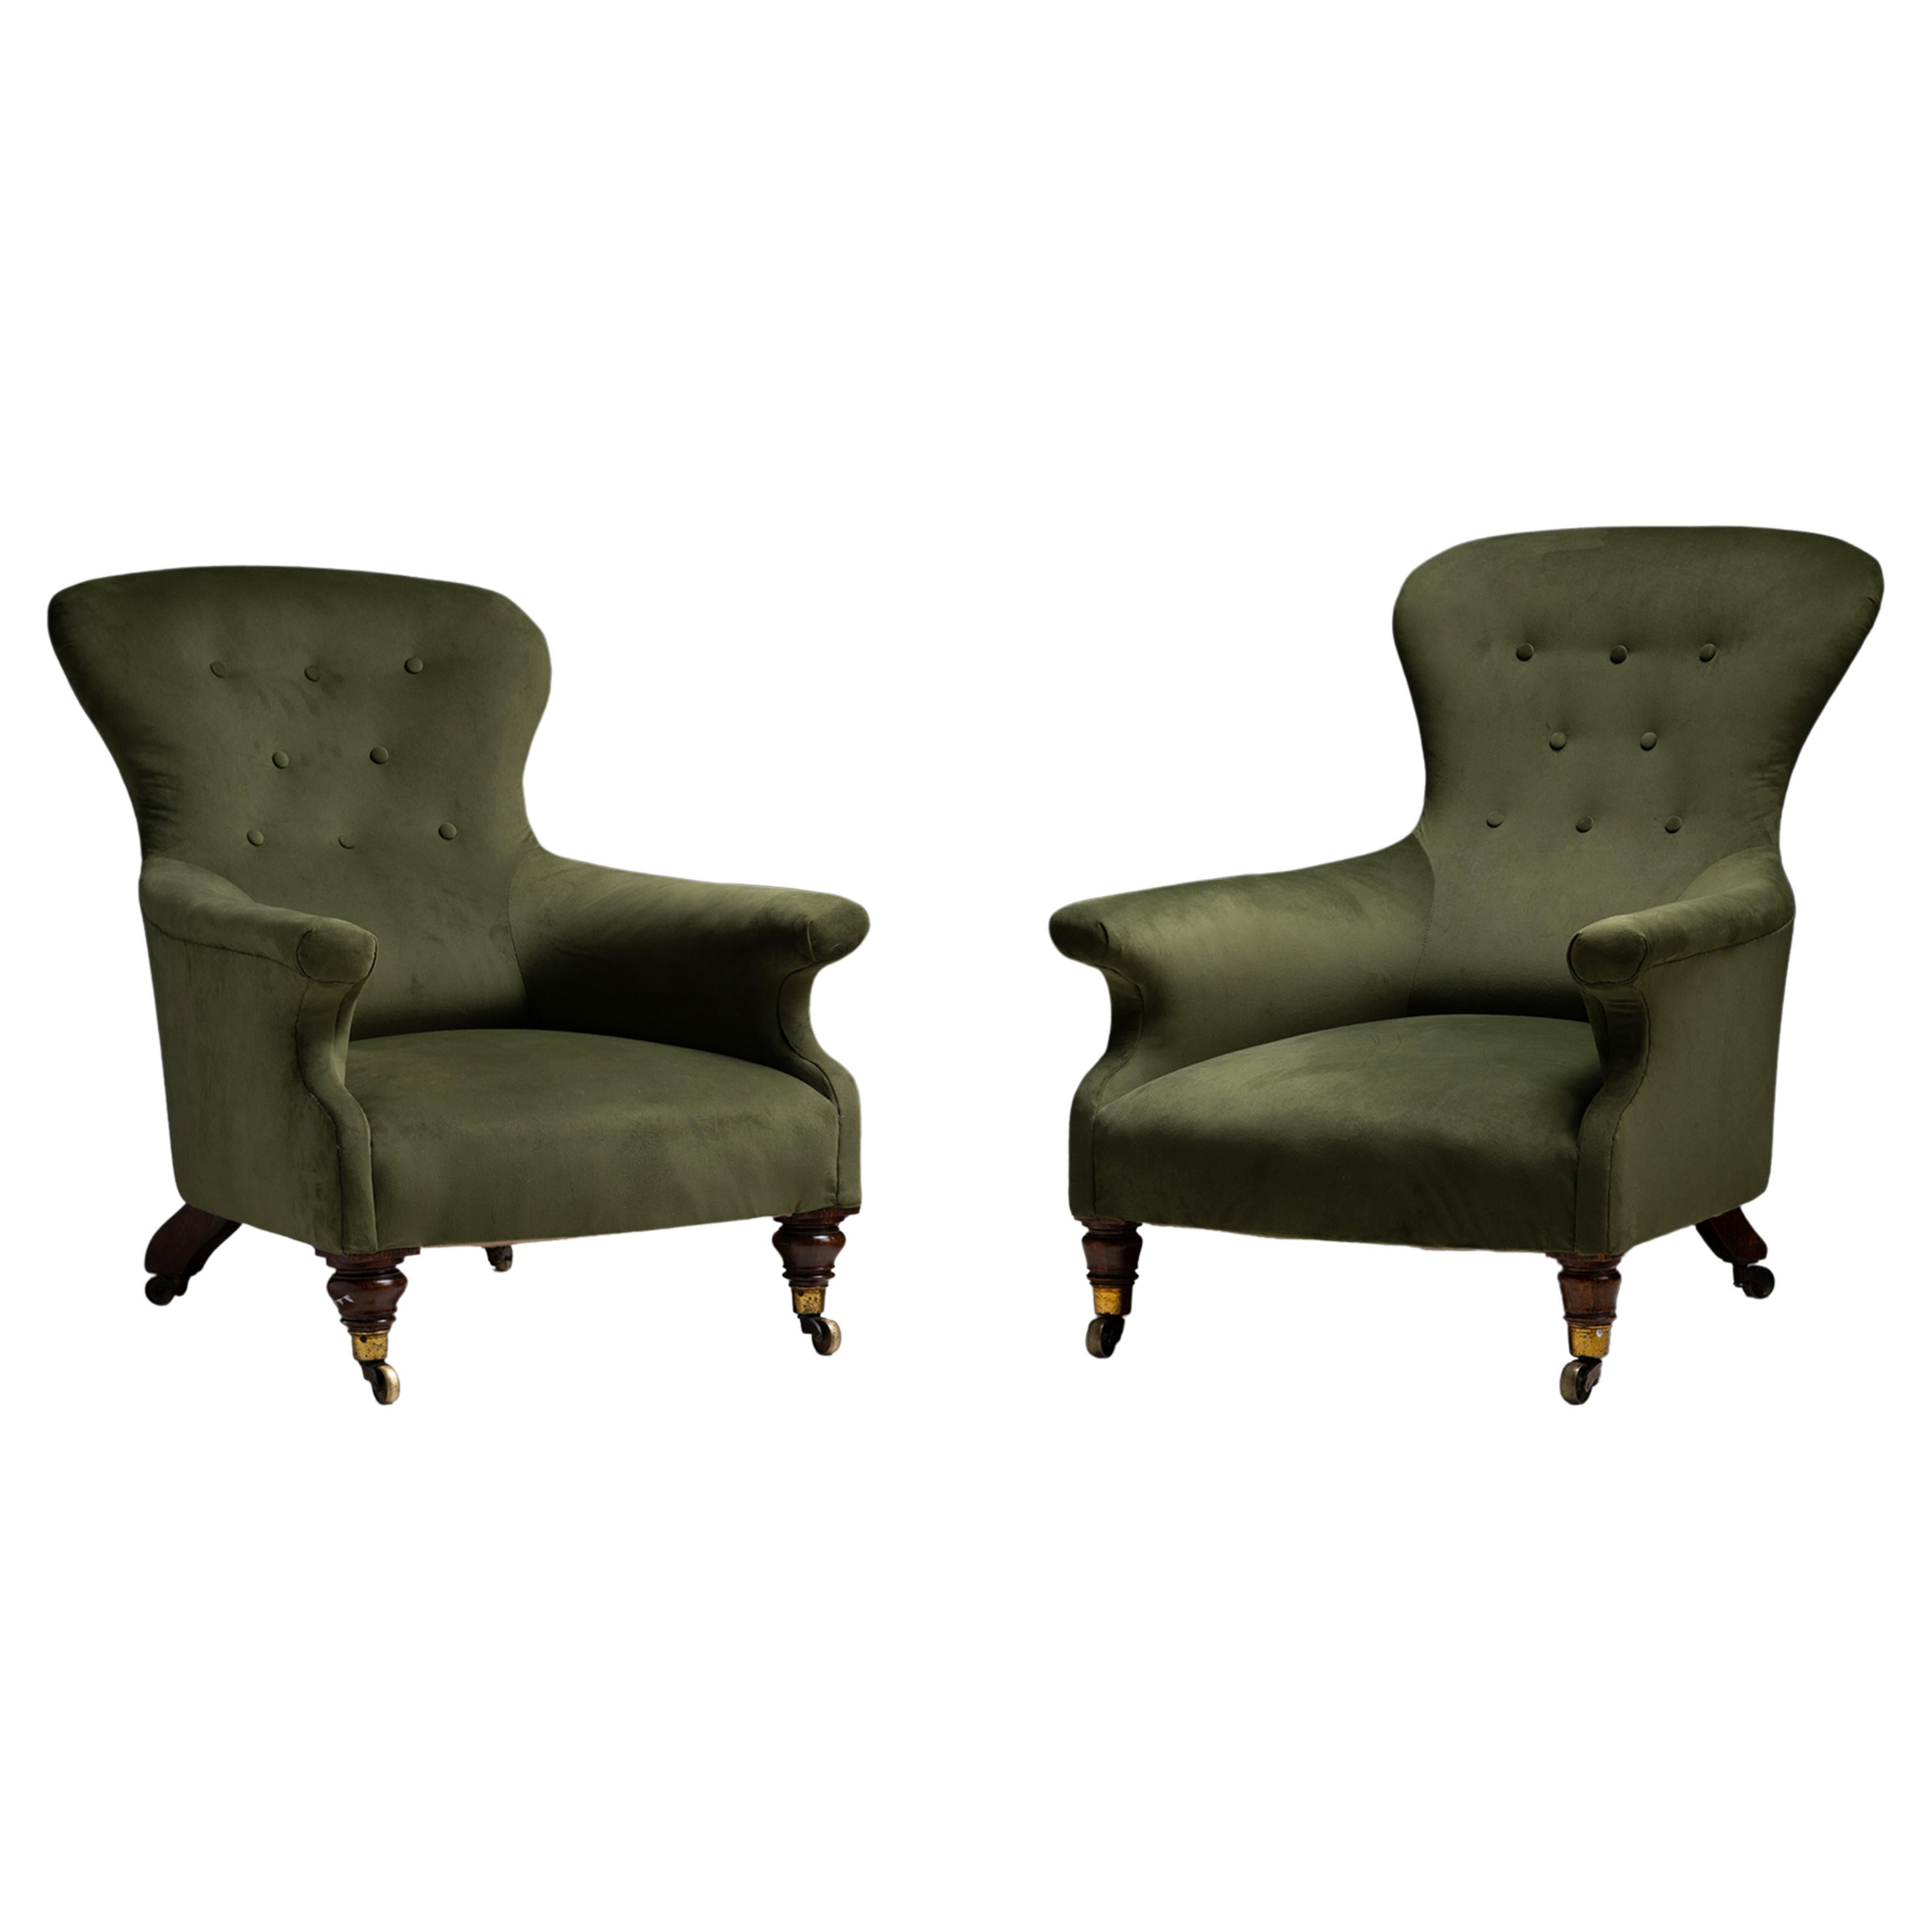 Pair of Library Chairs in Velvet, England, circa 1910